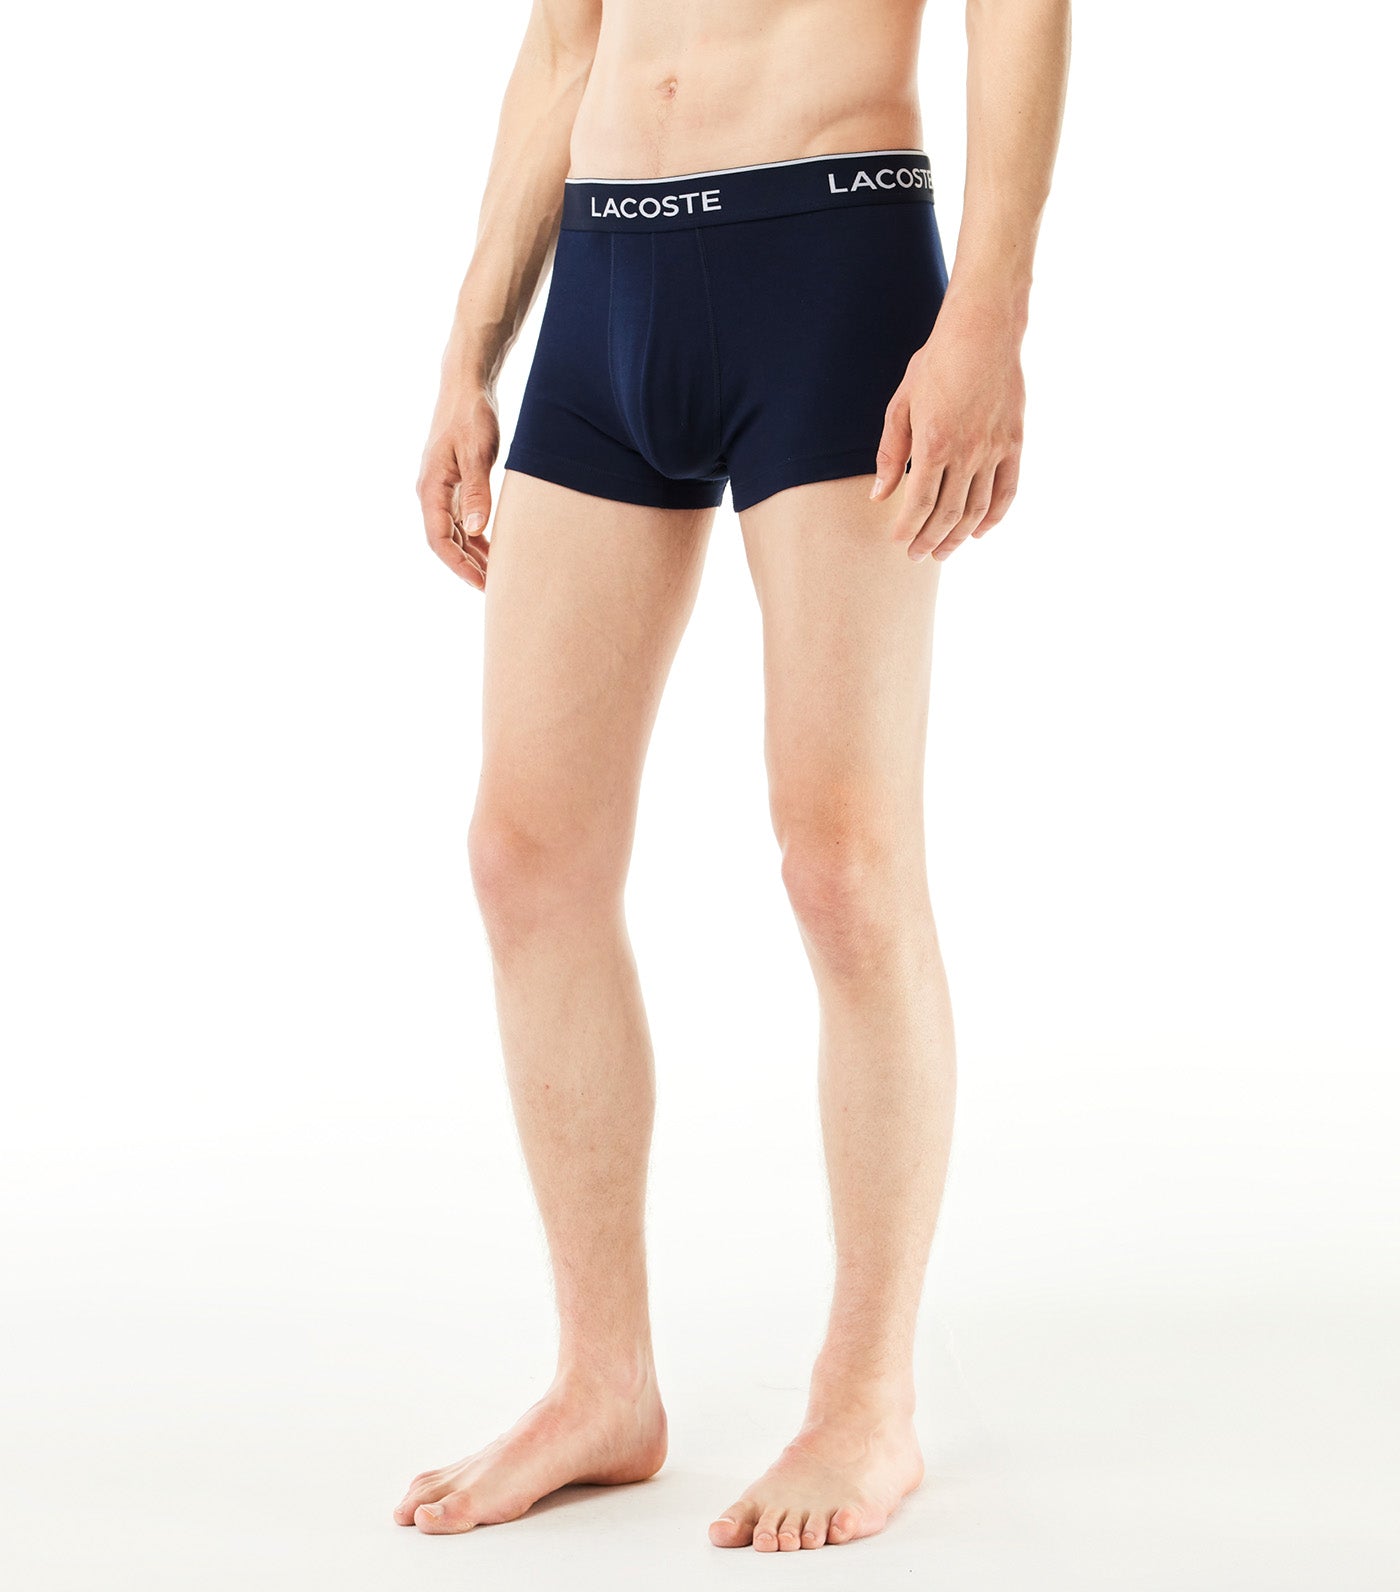 Pack of 3 Casual Black Boxer Briefs Cove/White-Navy Blue